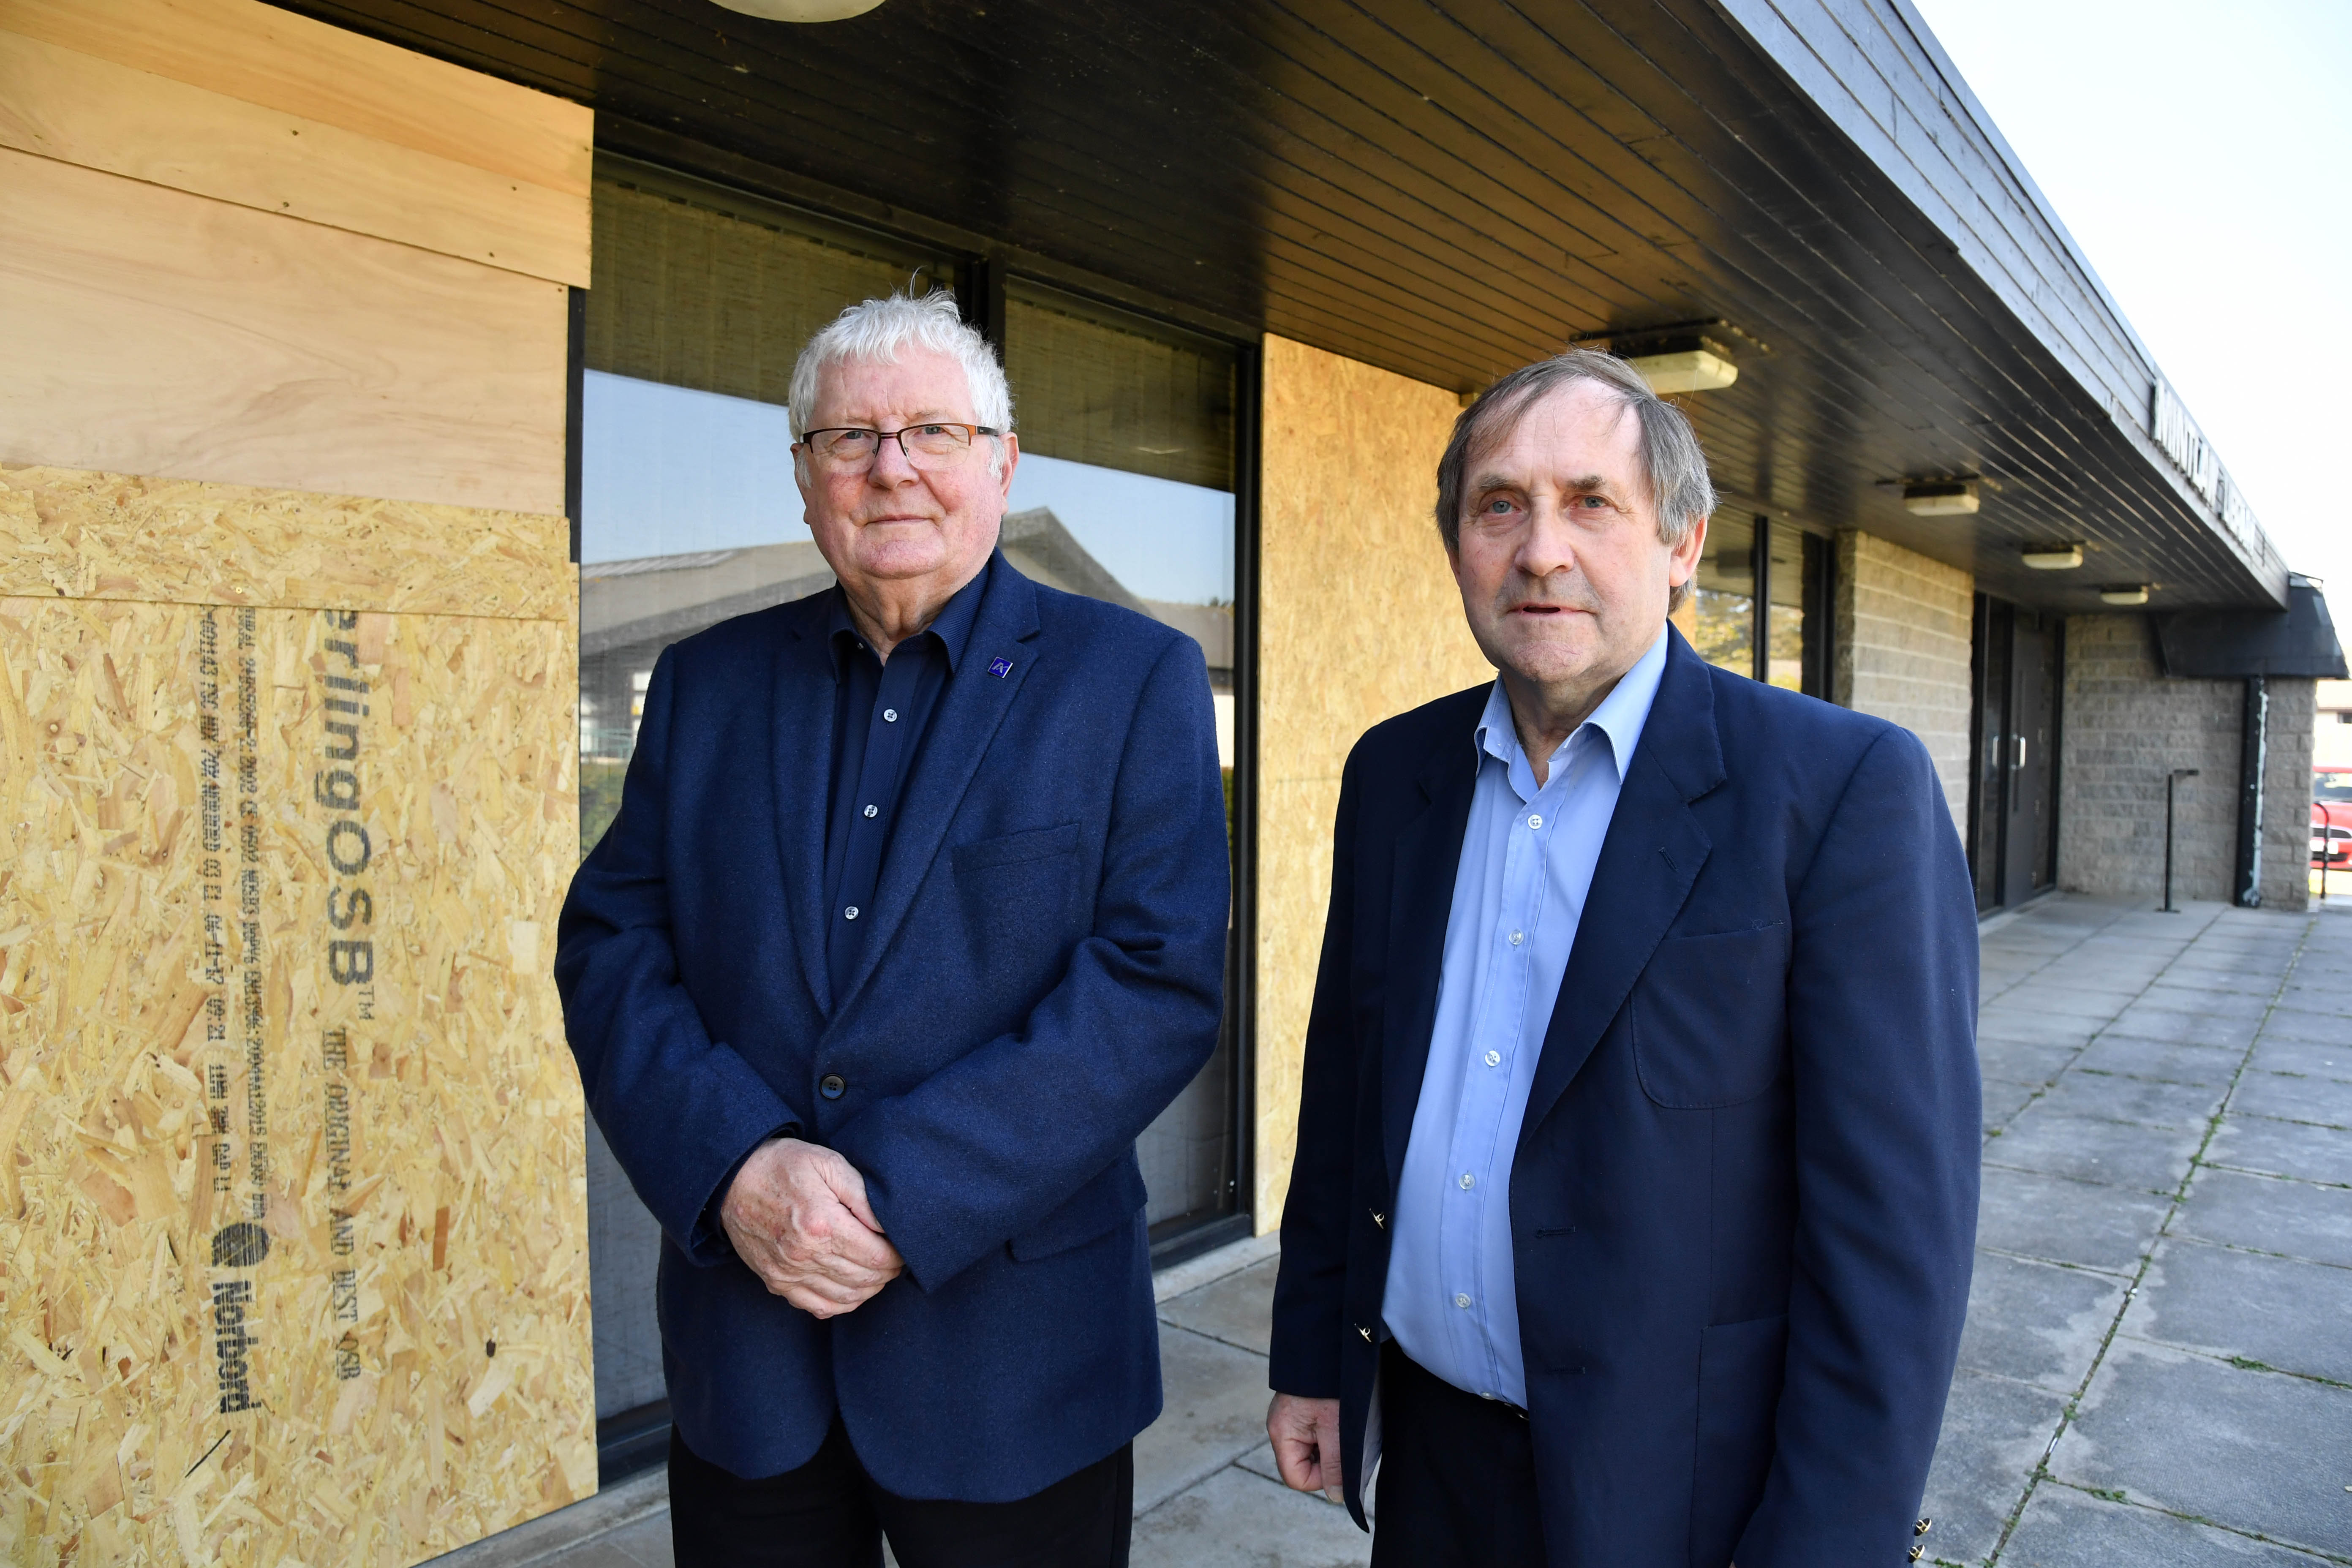 Councillors Norman Smith (l) and Jim Ingram at Mintlaw public library where vandals have smashed several full length windows.